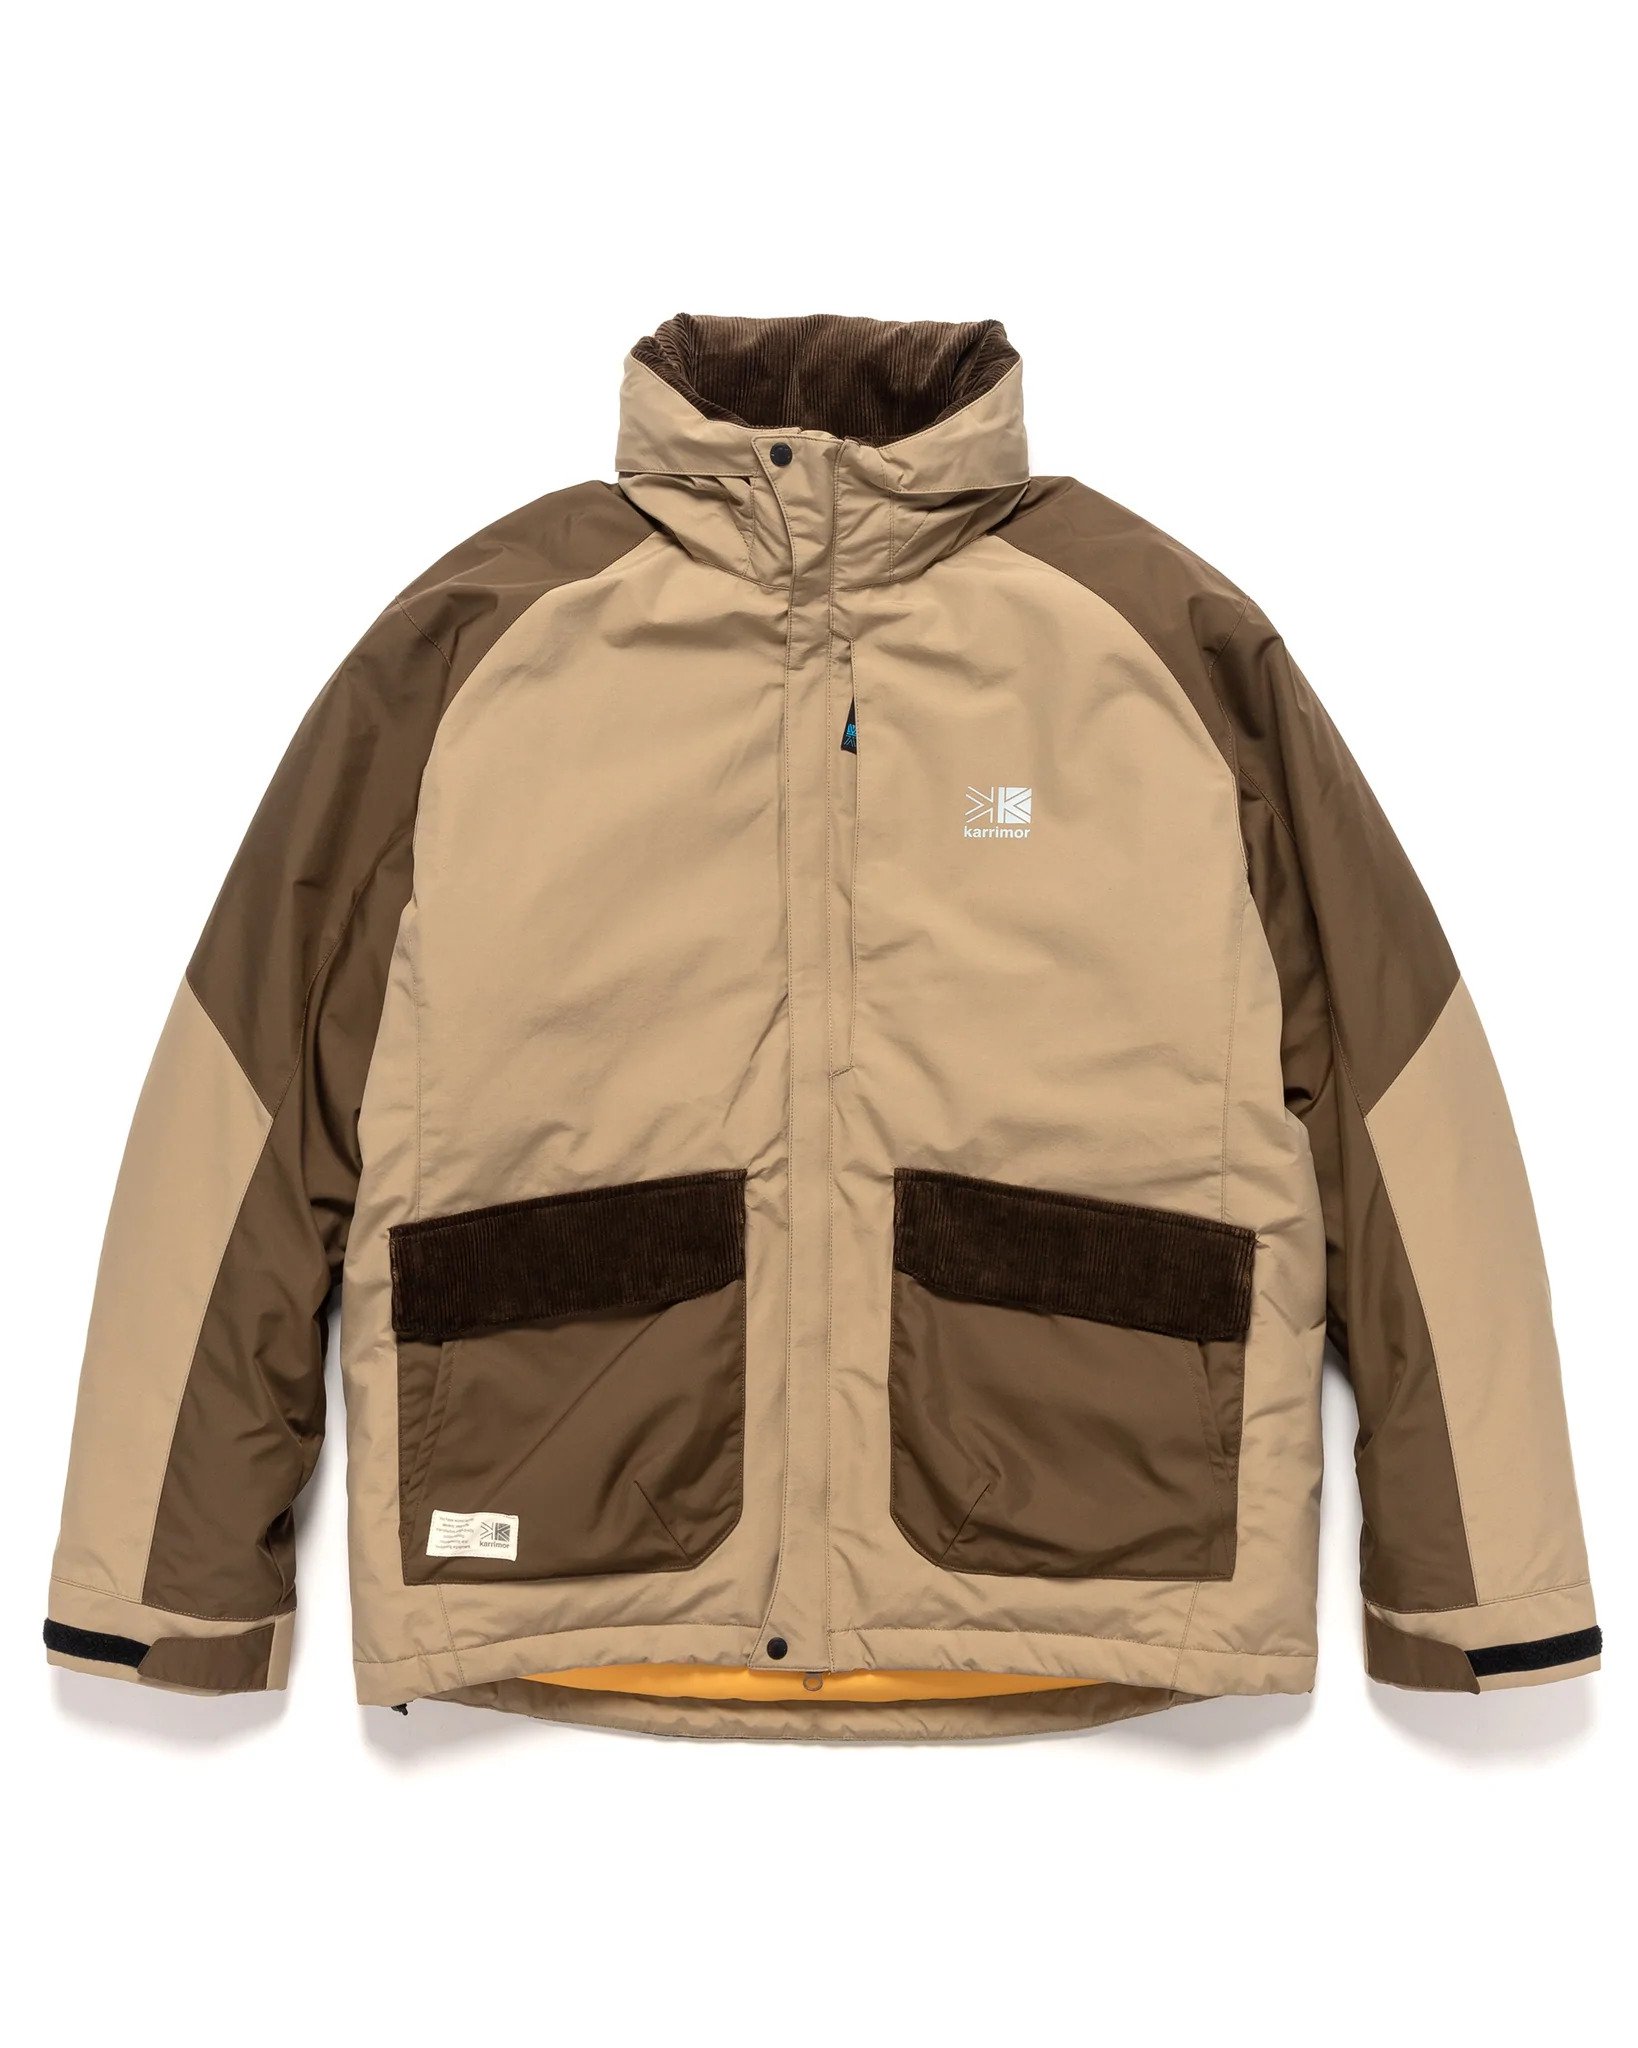 HYKE Launches Exclusive Outerwear Colourways for Edition and SUPER 